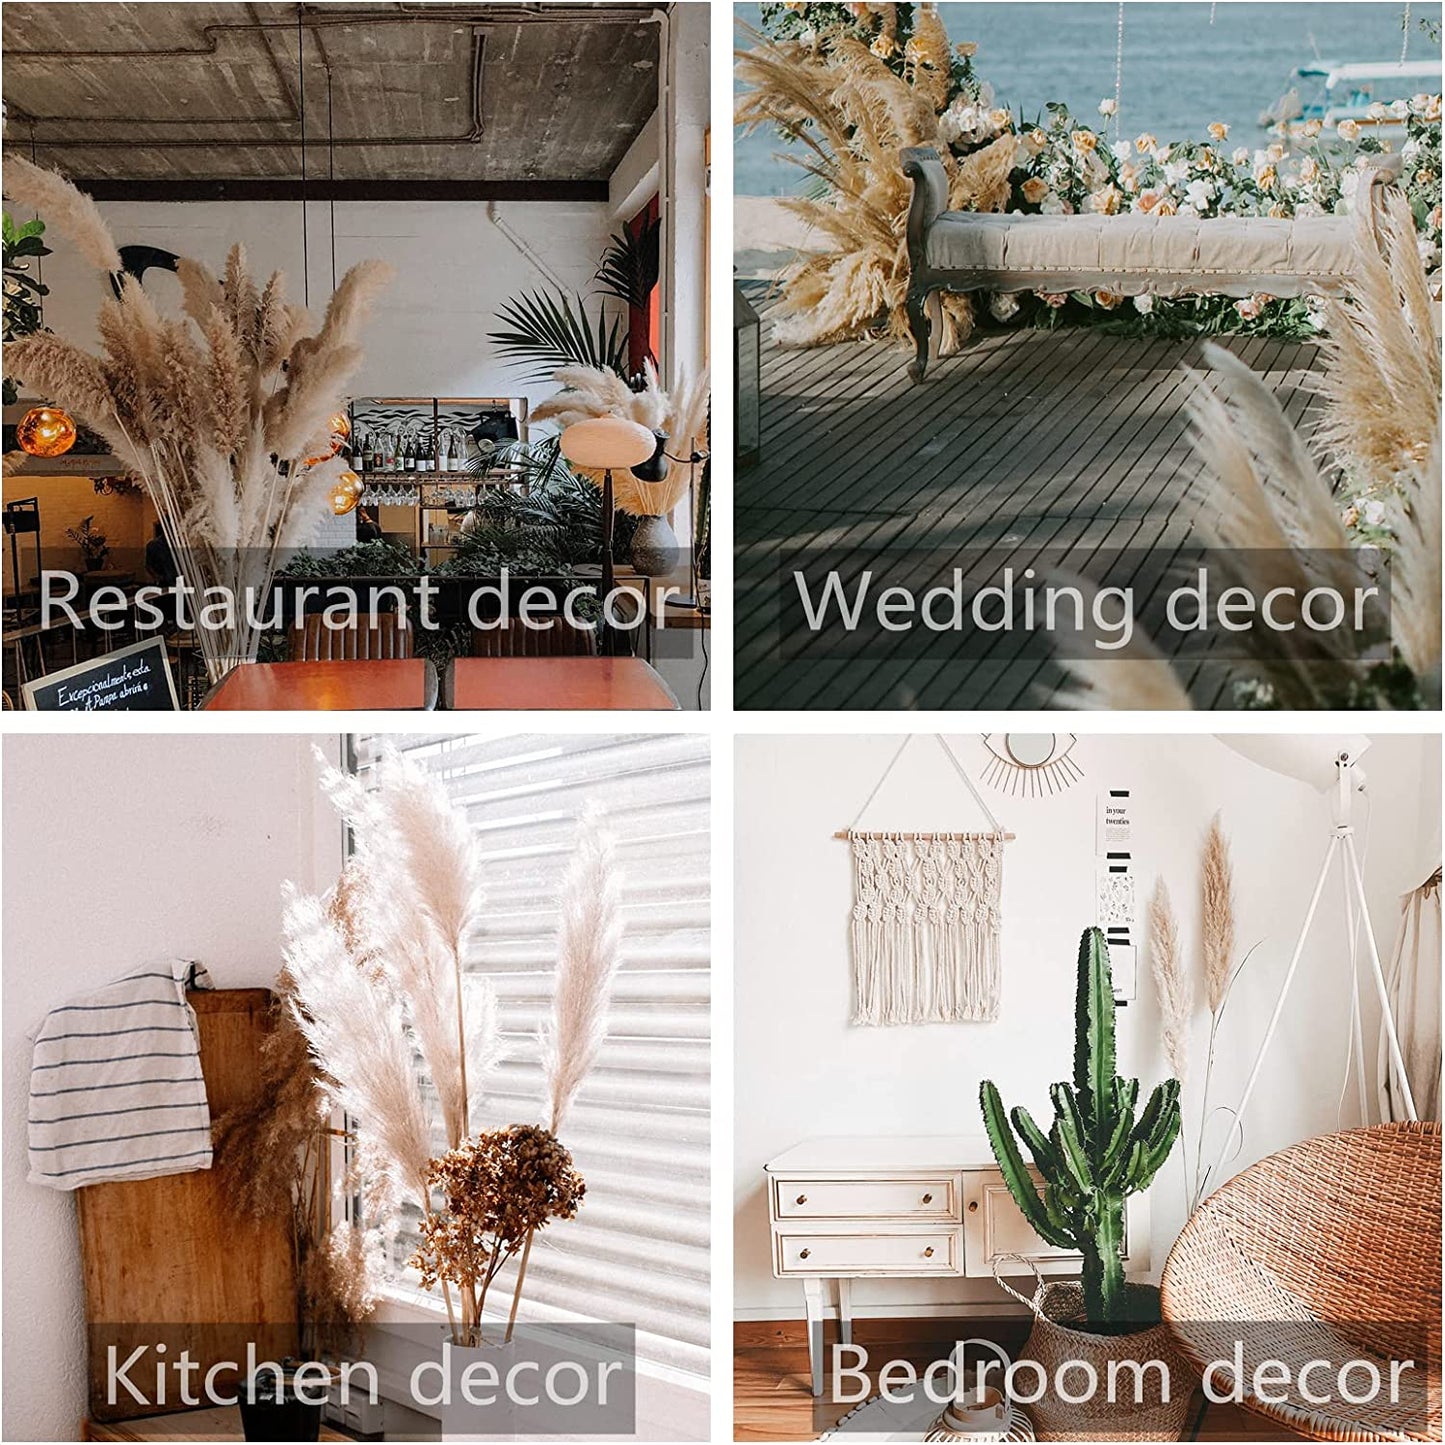 100PCS Natural Dried Pampas Grass Decor - 17.5 Fluffy Pampas Grass Bouquet  - Boho Home Decor Dried Flowers for Wedding Floral Room Home Party Table  Decorations